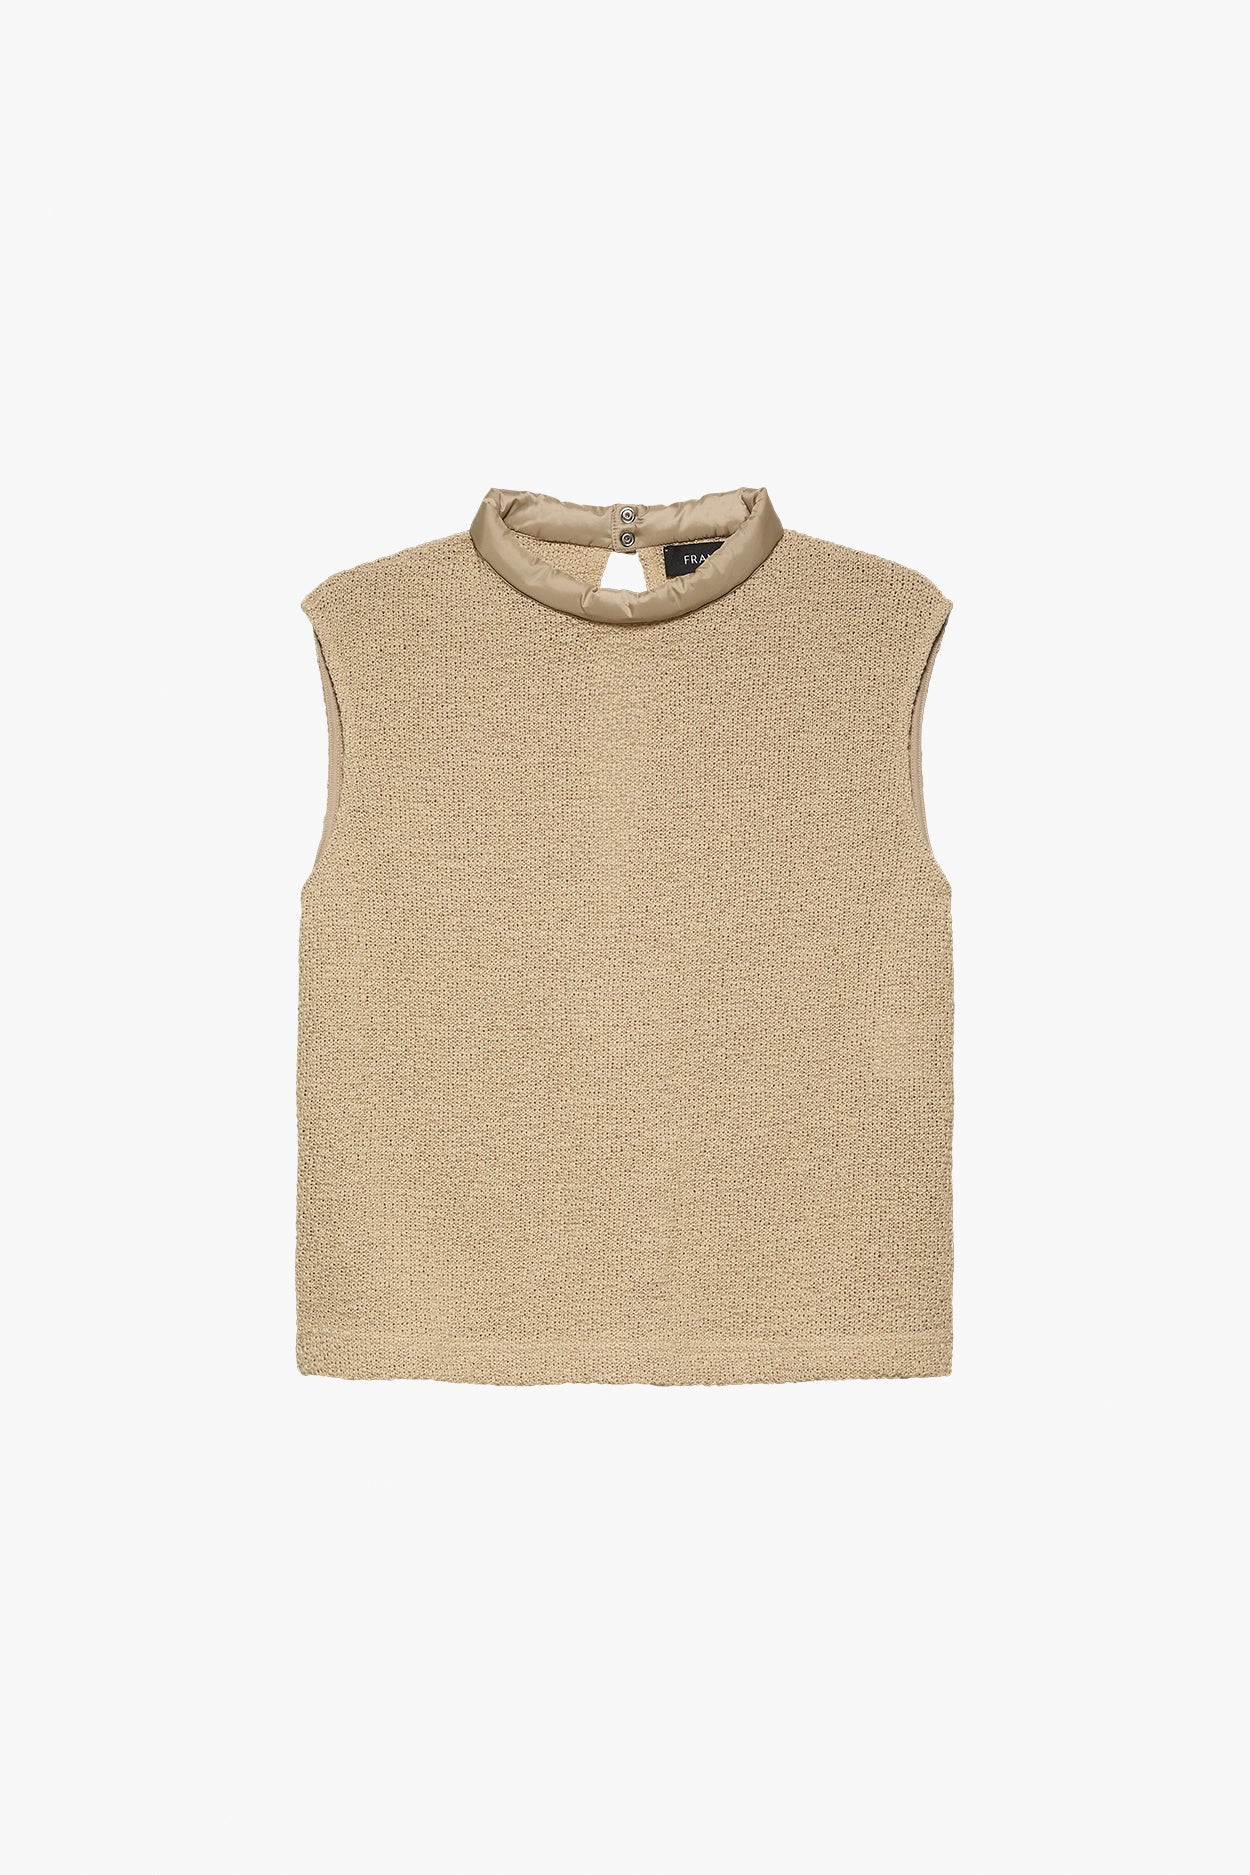 como sleeveless knitted jersey tower top